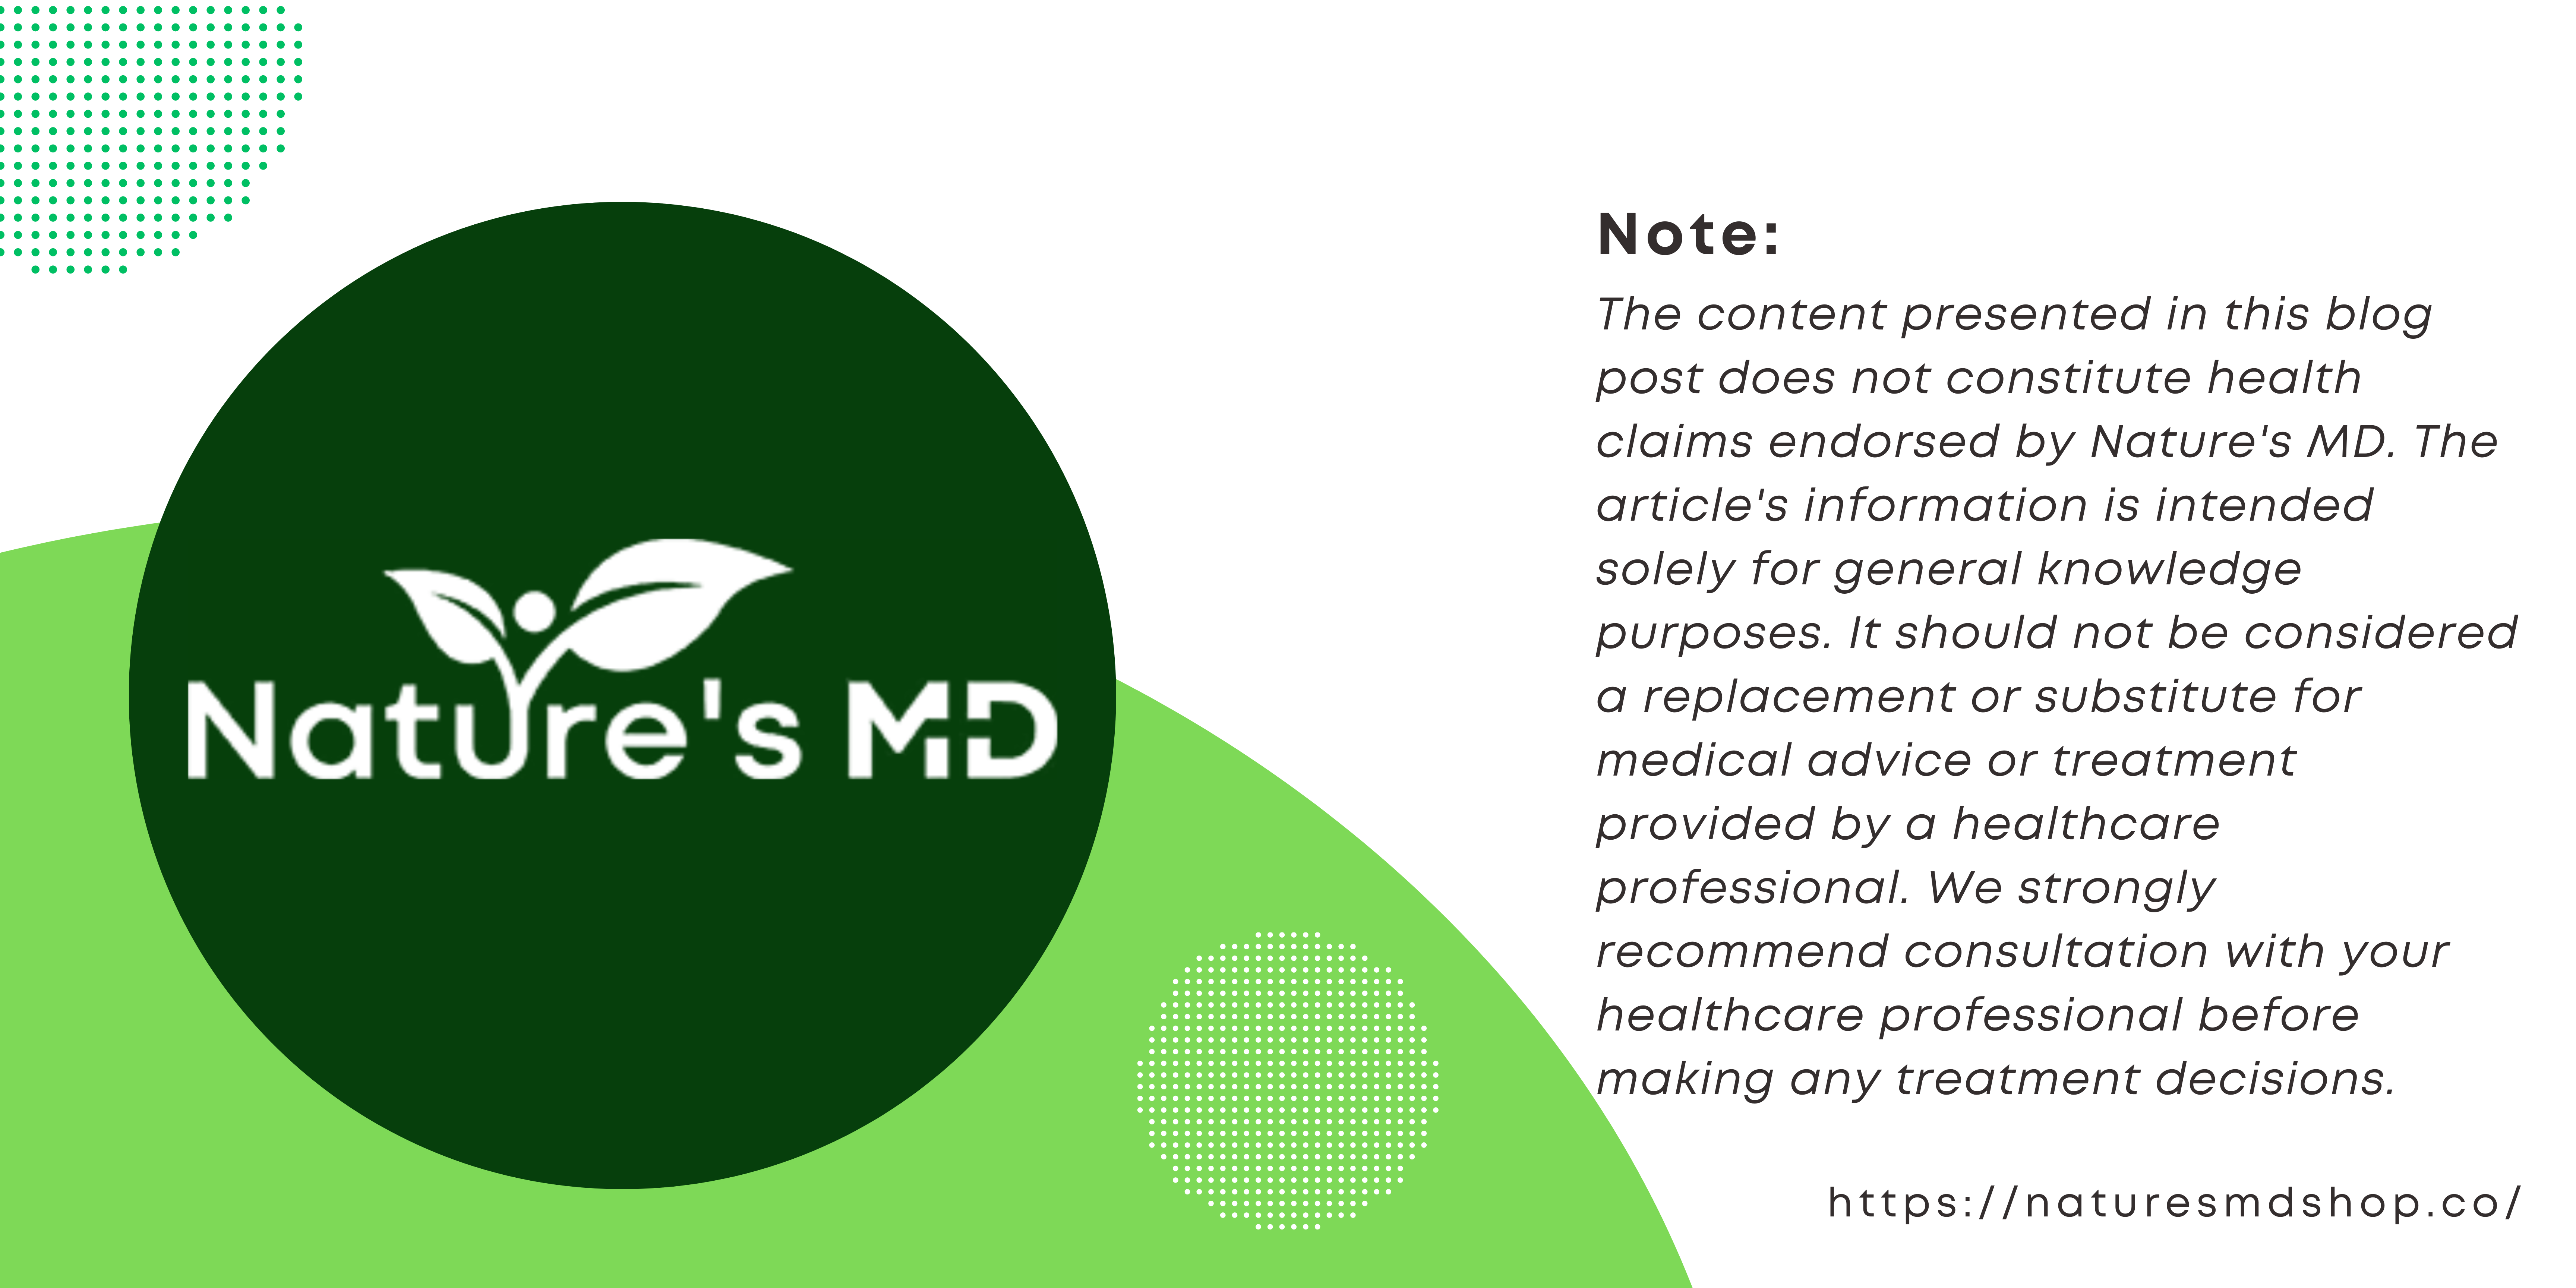 Nature MD Blog note